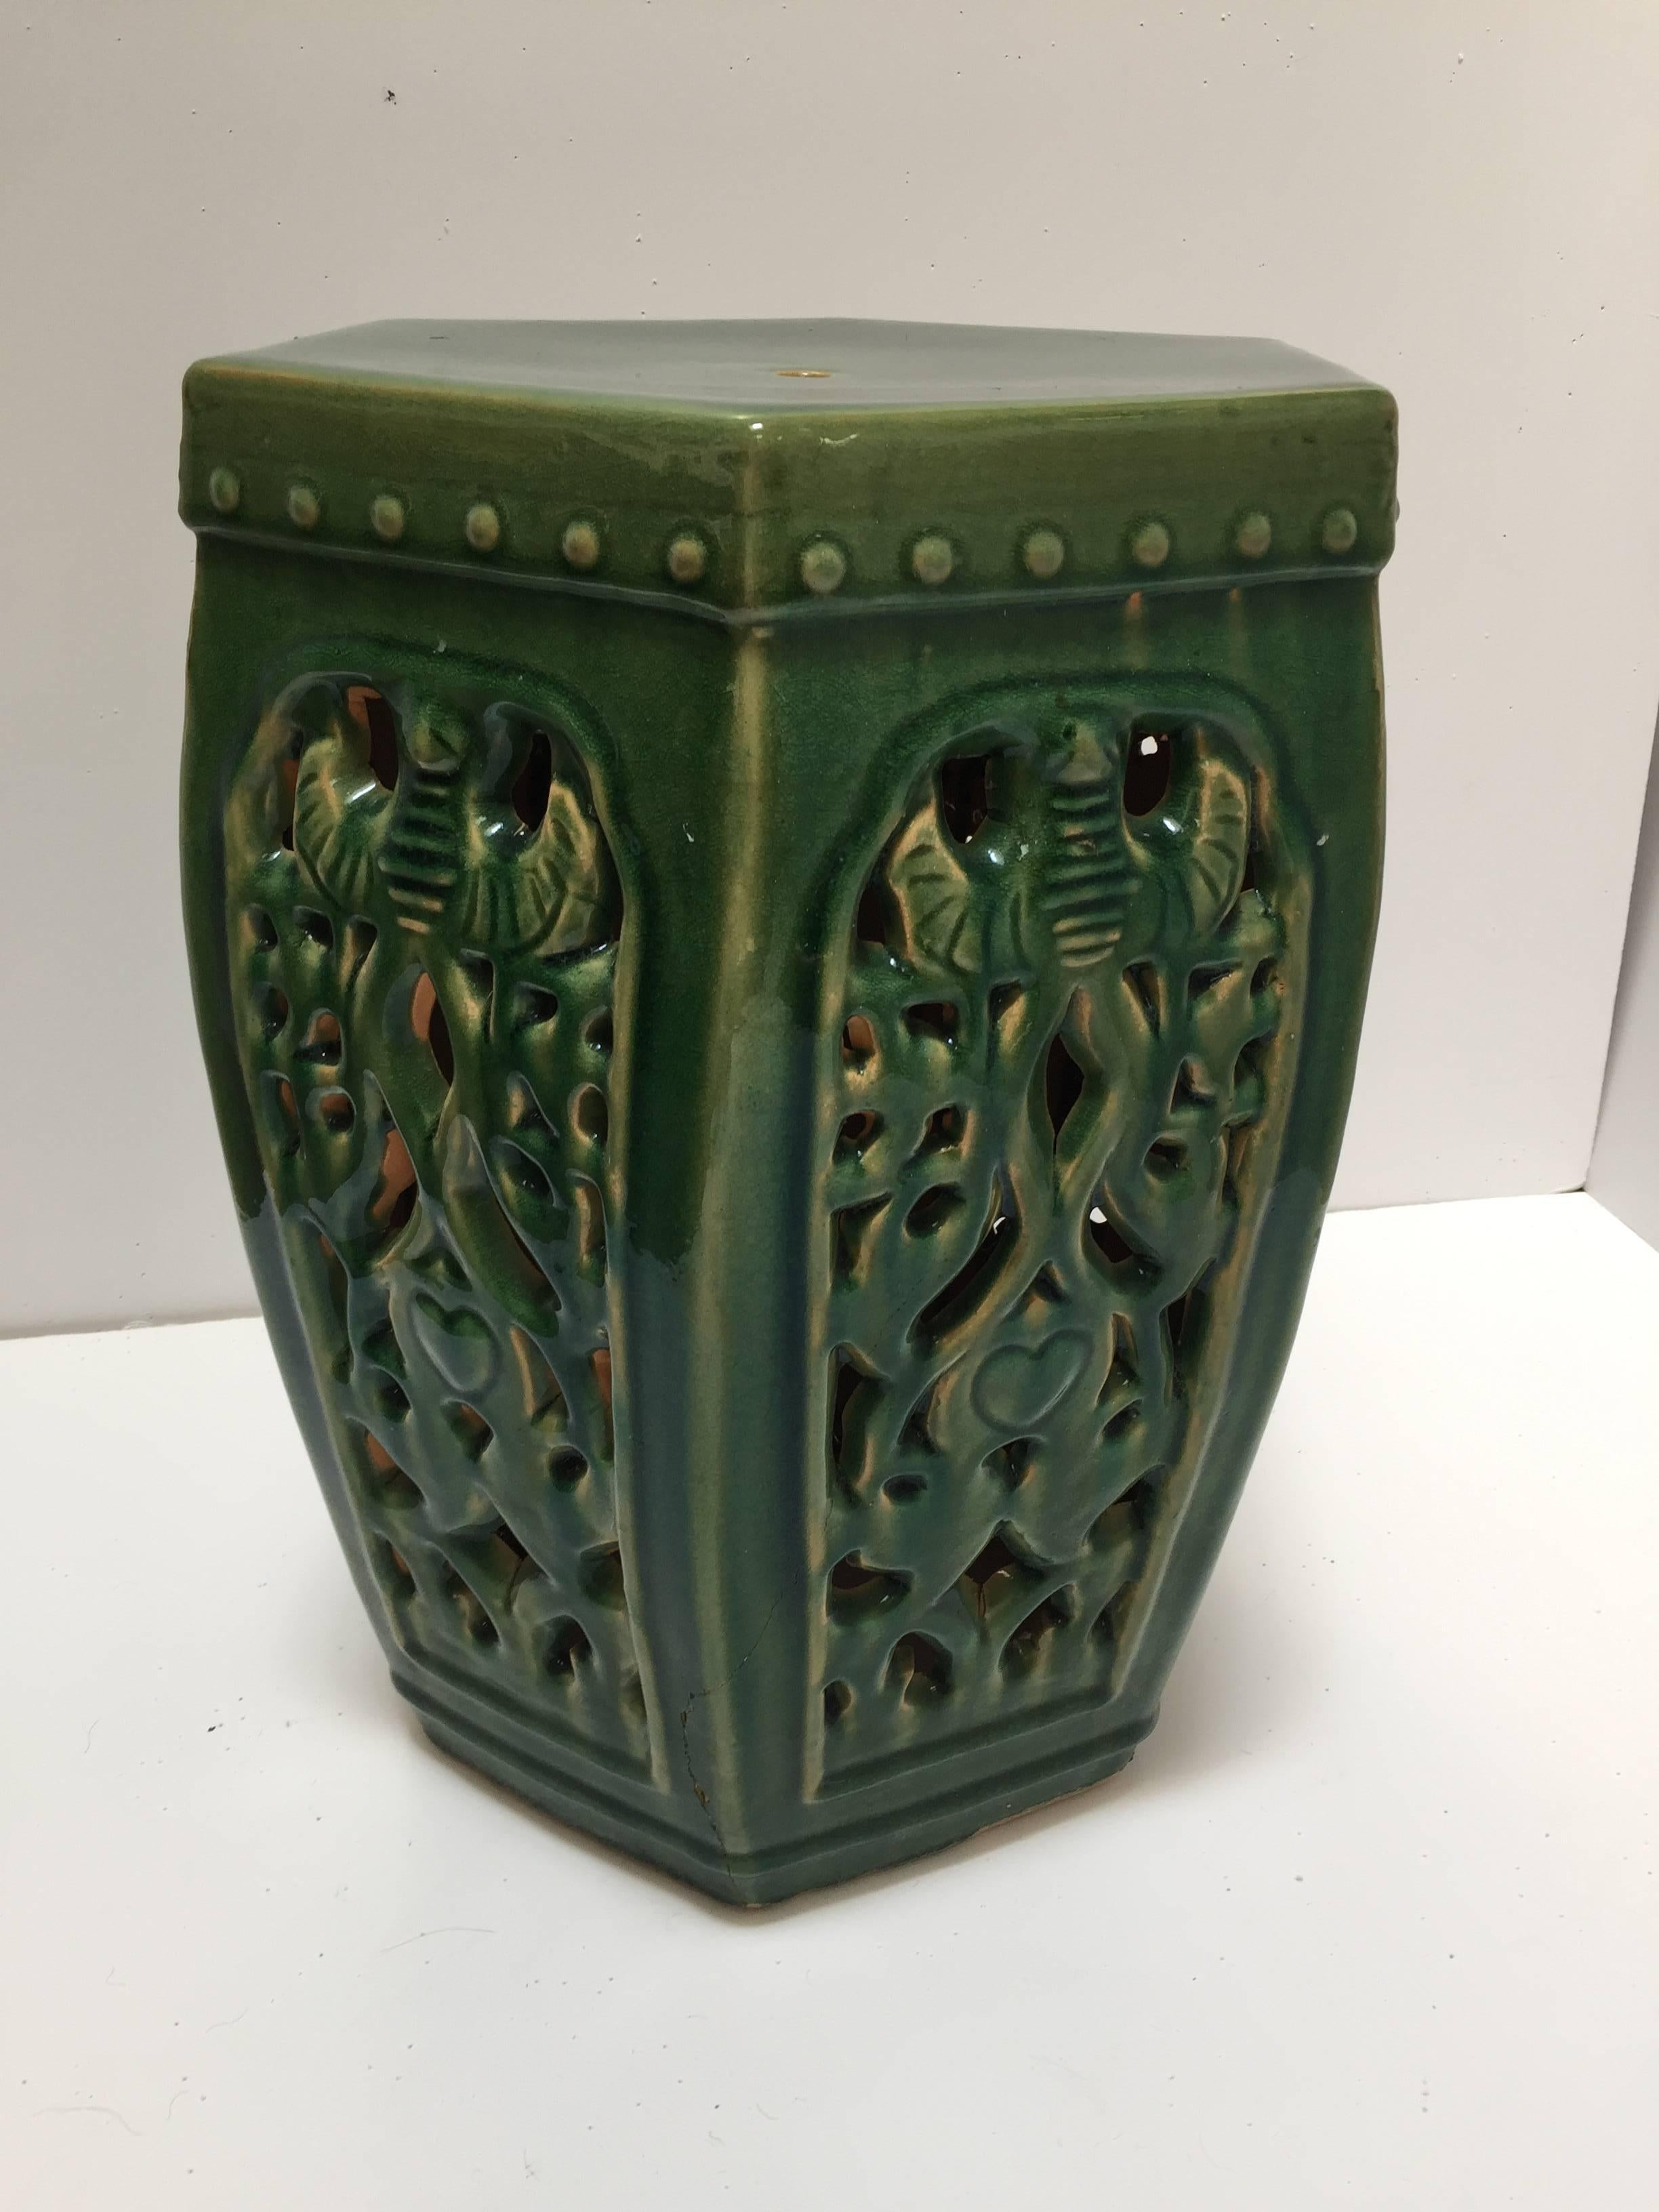 Great color, emerald green Chinese ceramic garden stool.
Asian ceramic seat in hexagonal shape, nicely carved on each sides.
Great to use indoor or outdoor as a stool, end table, or plant stand.
Asian ceramic garden furniture, light, easy to carry